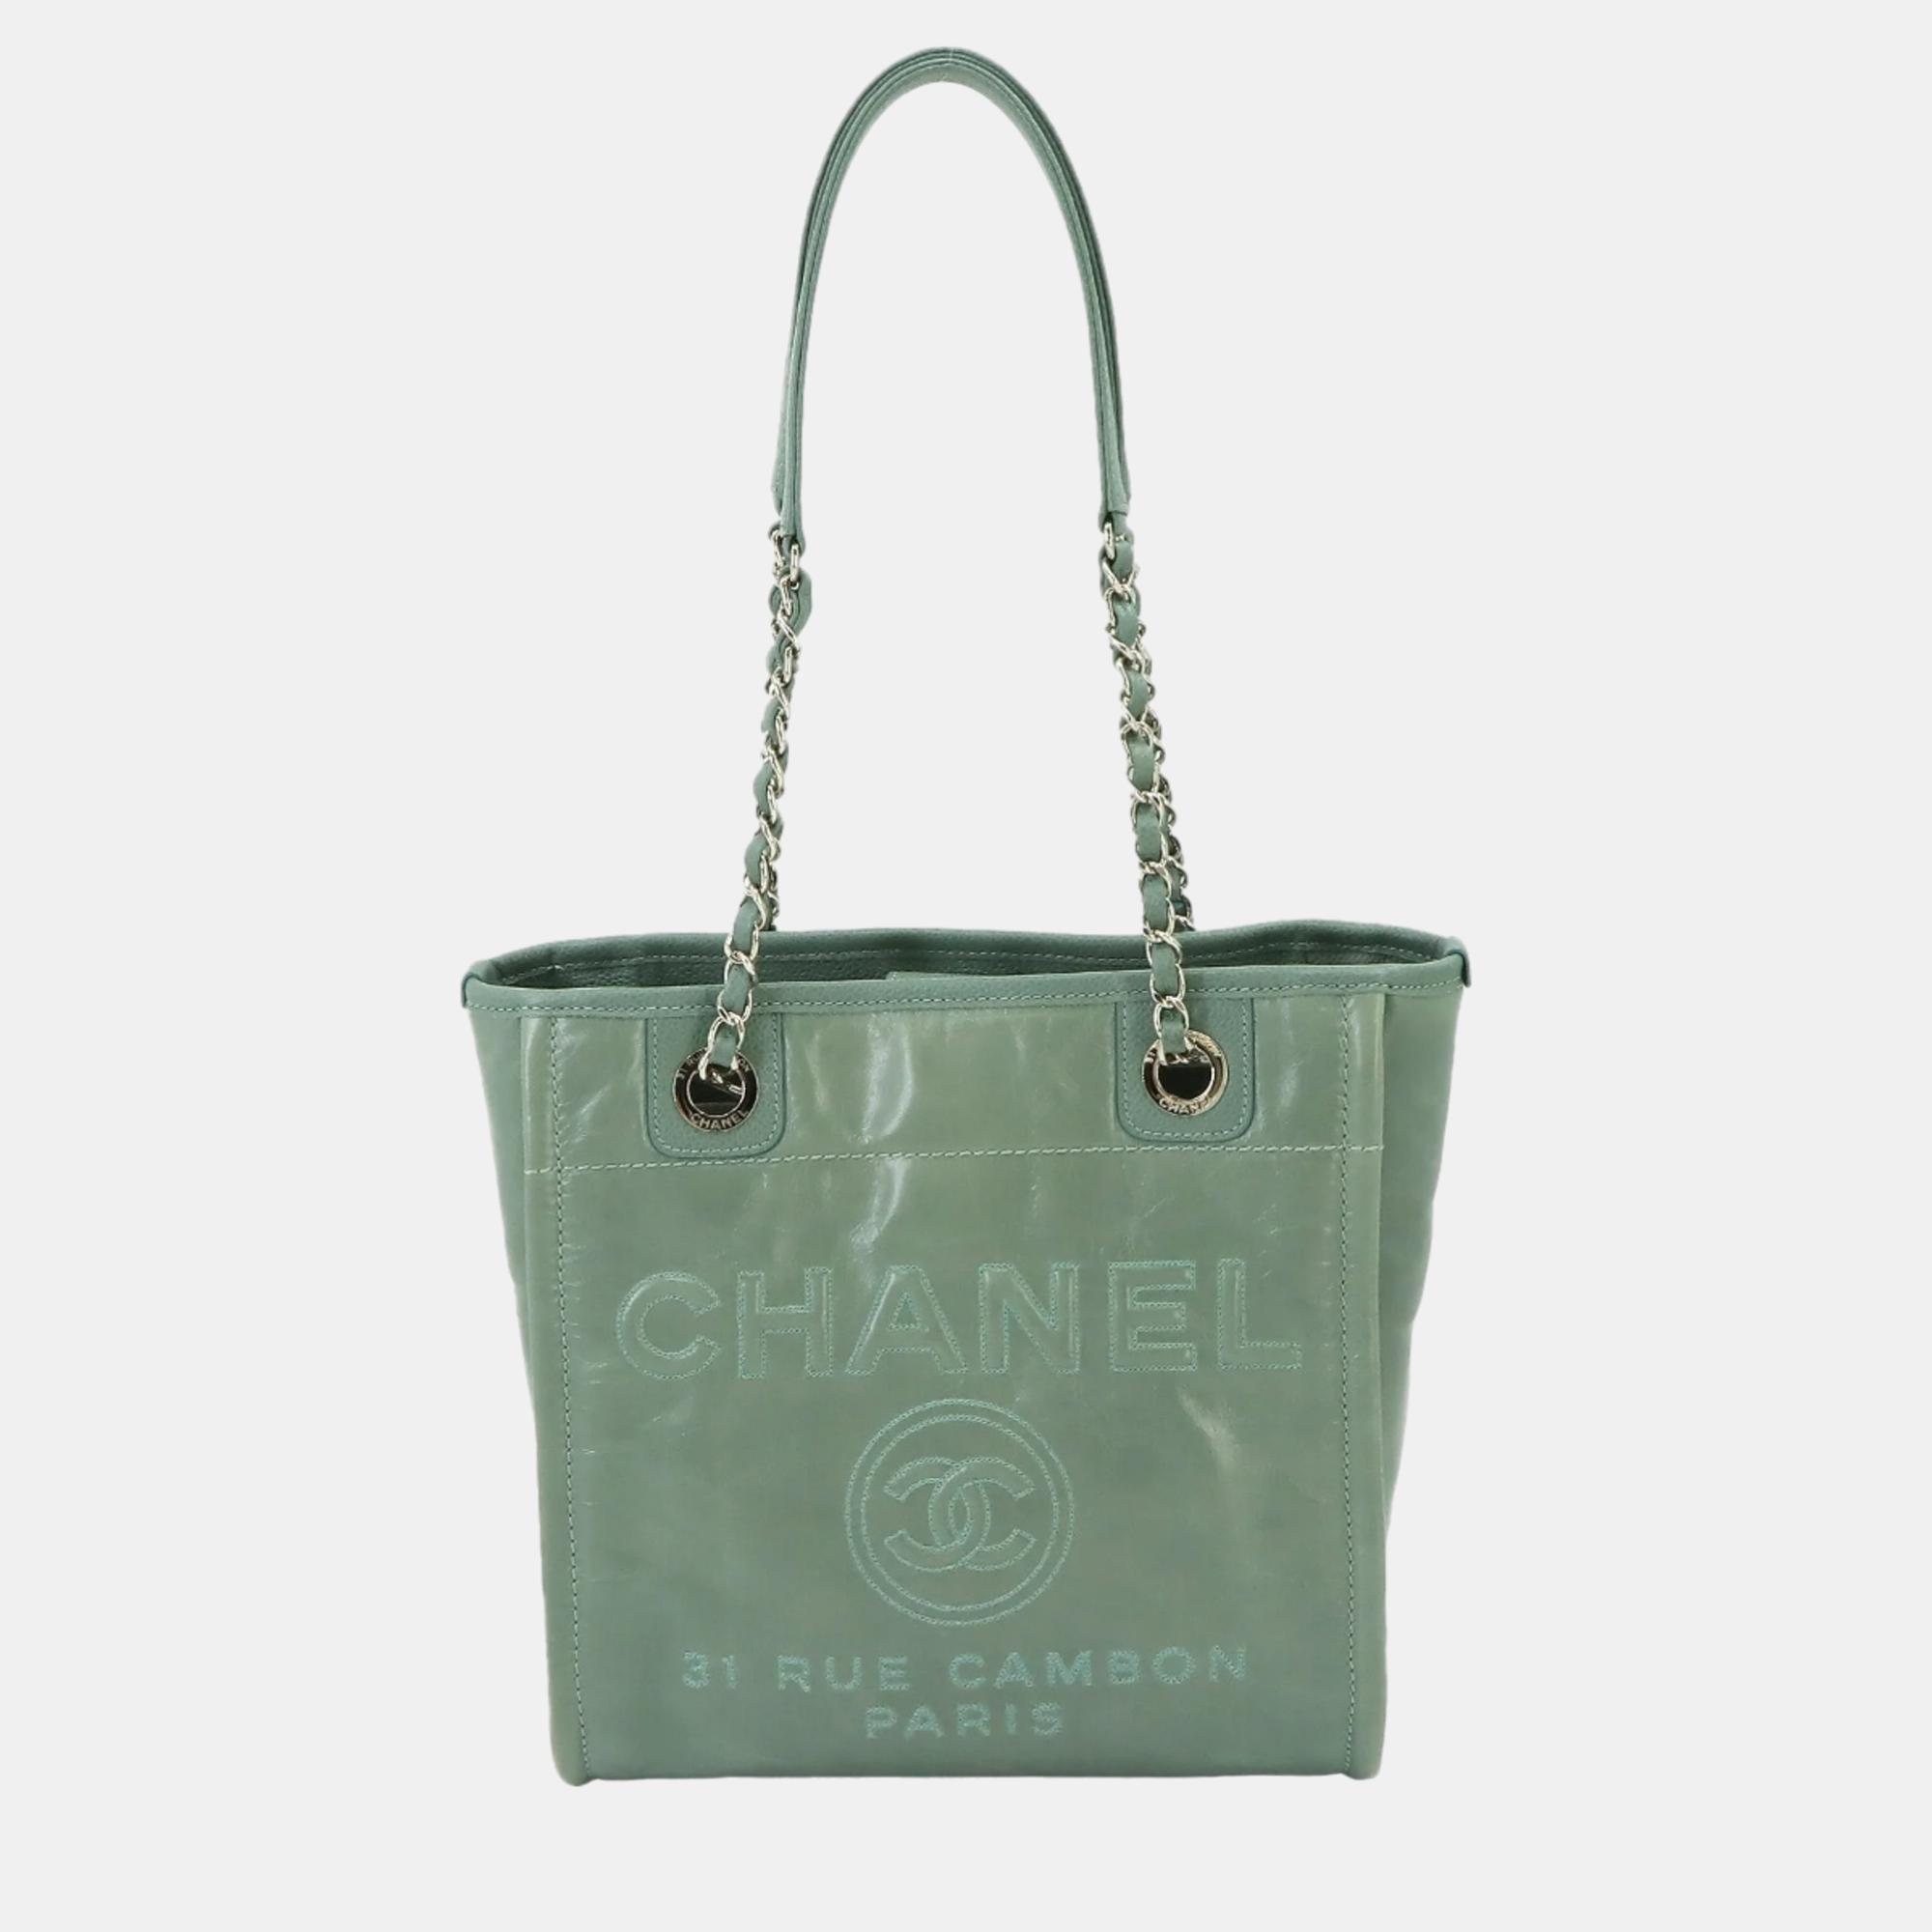 Chanel green leather deauville tote bag